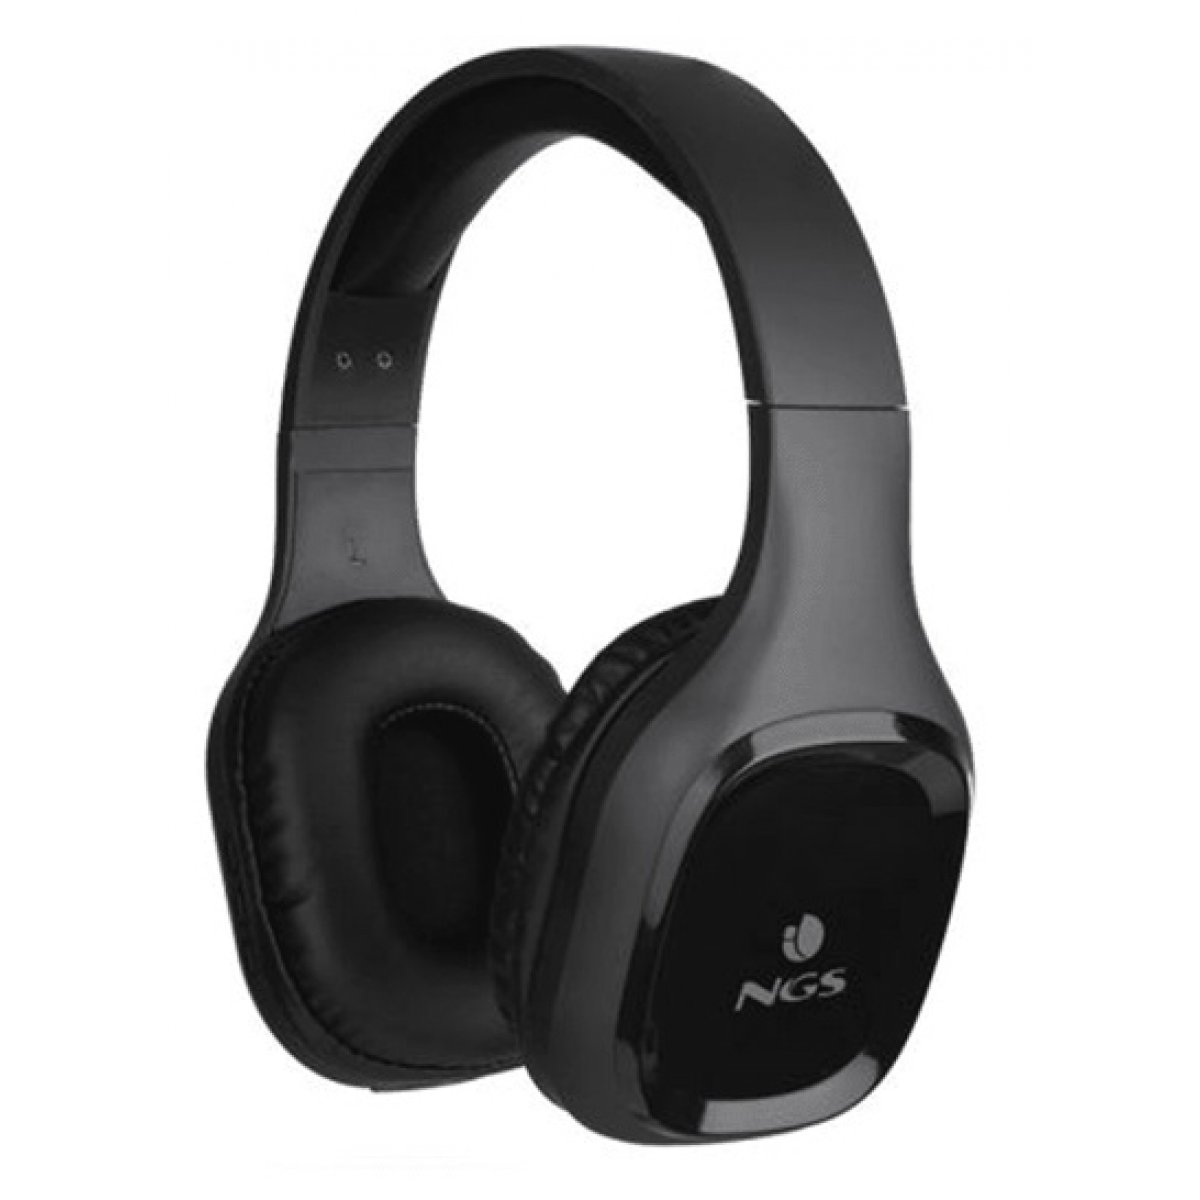 AURICULAR ST + MICRO BT NGS ARTICA SLOTH NEGRO